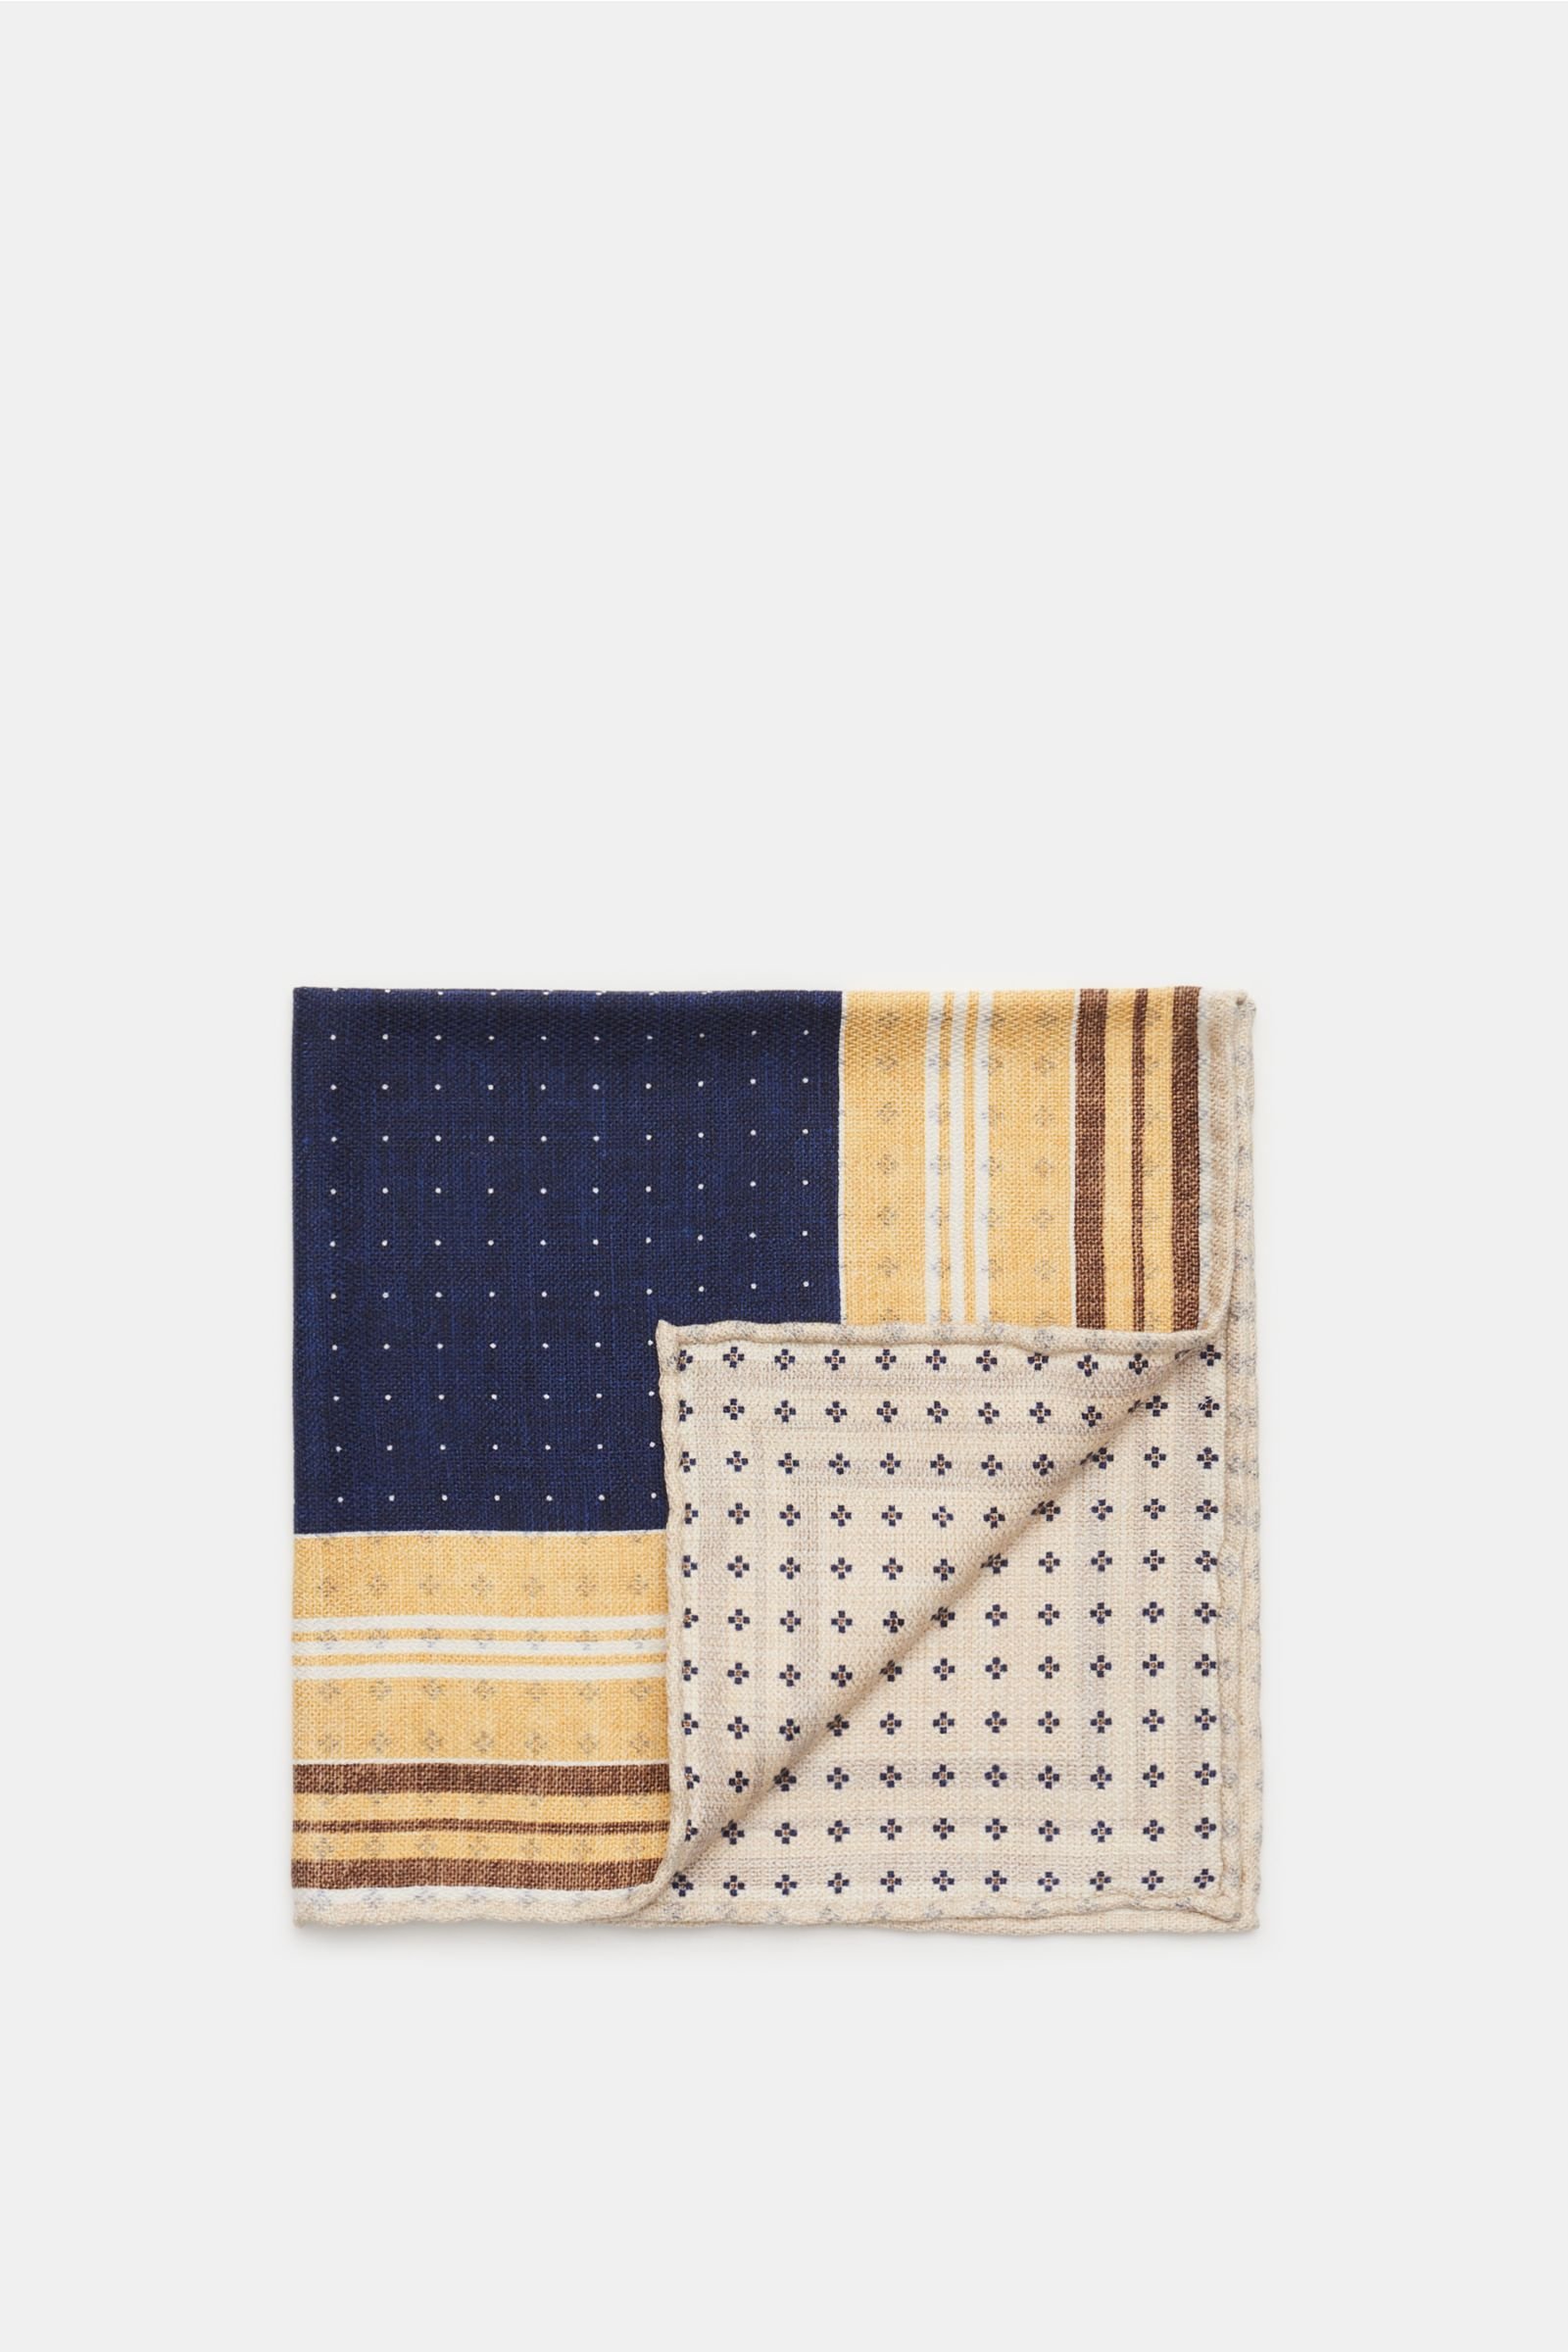 Pocket square yellow/navy patterned